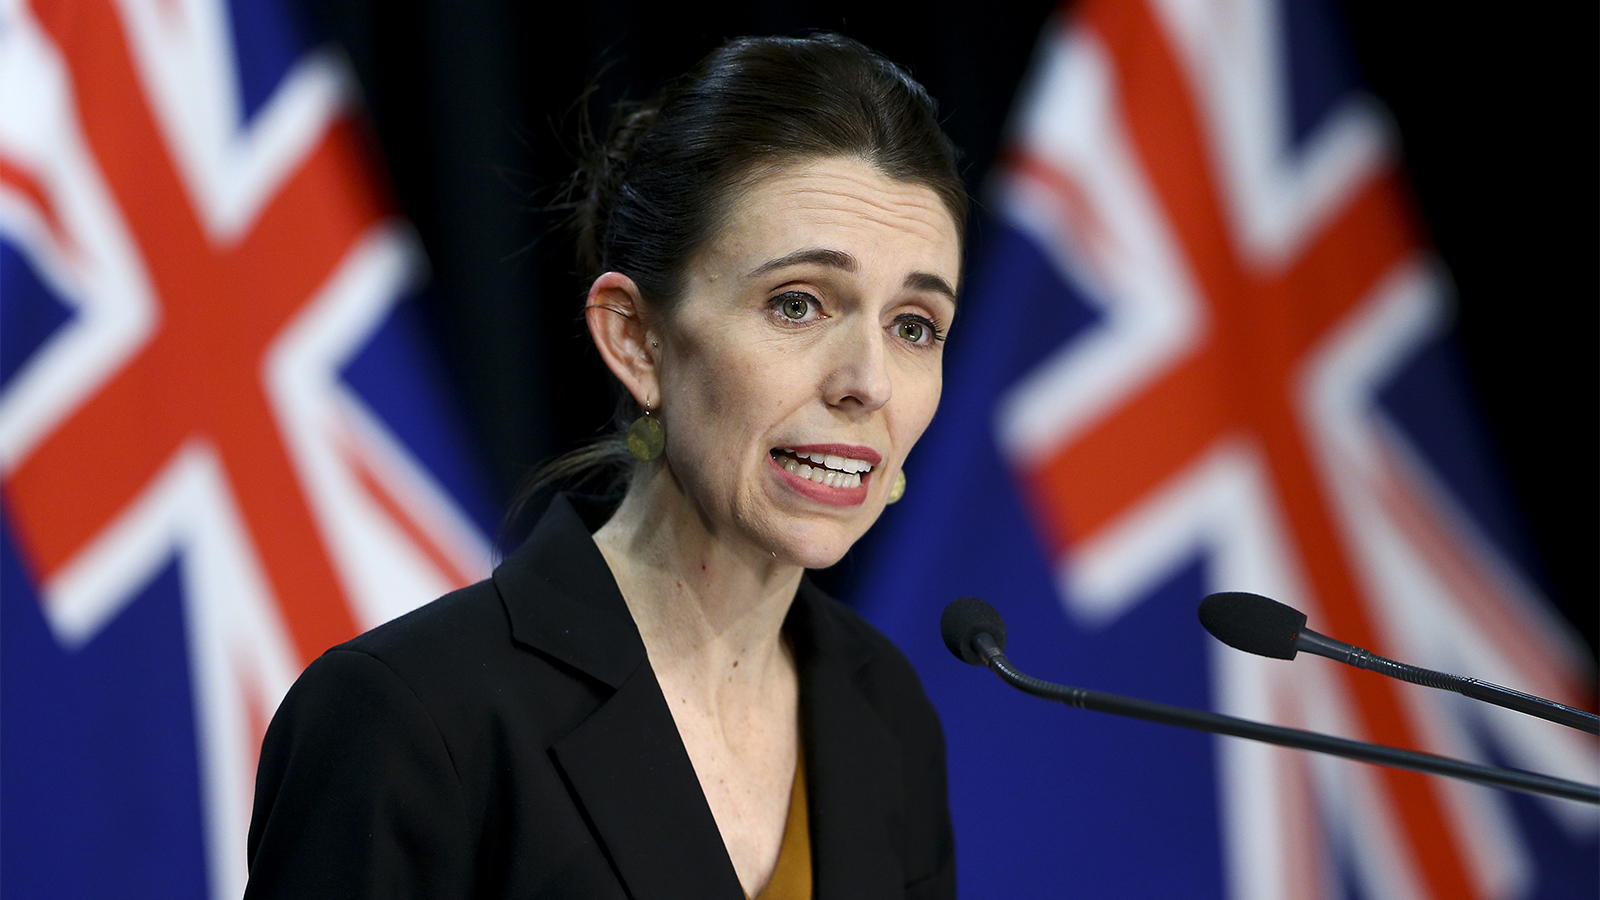 WELLINGTON, NEW ZEALAND - AUGUST 24: Prime Minister Jacinda Ardern speaks to media during a press conference at Parliament on August 24, 2020 in Wellington, New Zealand. Prime Minister Jacinda Ardern announced an extension to the current COVID-19 Alert Levels as the country hits day 13 of increased restrictions following an outbreak. Auckland will remain in Alert Level 3 until Sunday 30 August at 11:59pm while the rest of the country will remain in level 2.  (Photo by Hagen Hopkins/Getty Images)